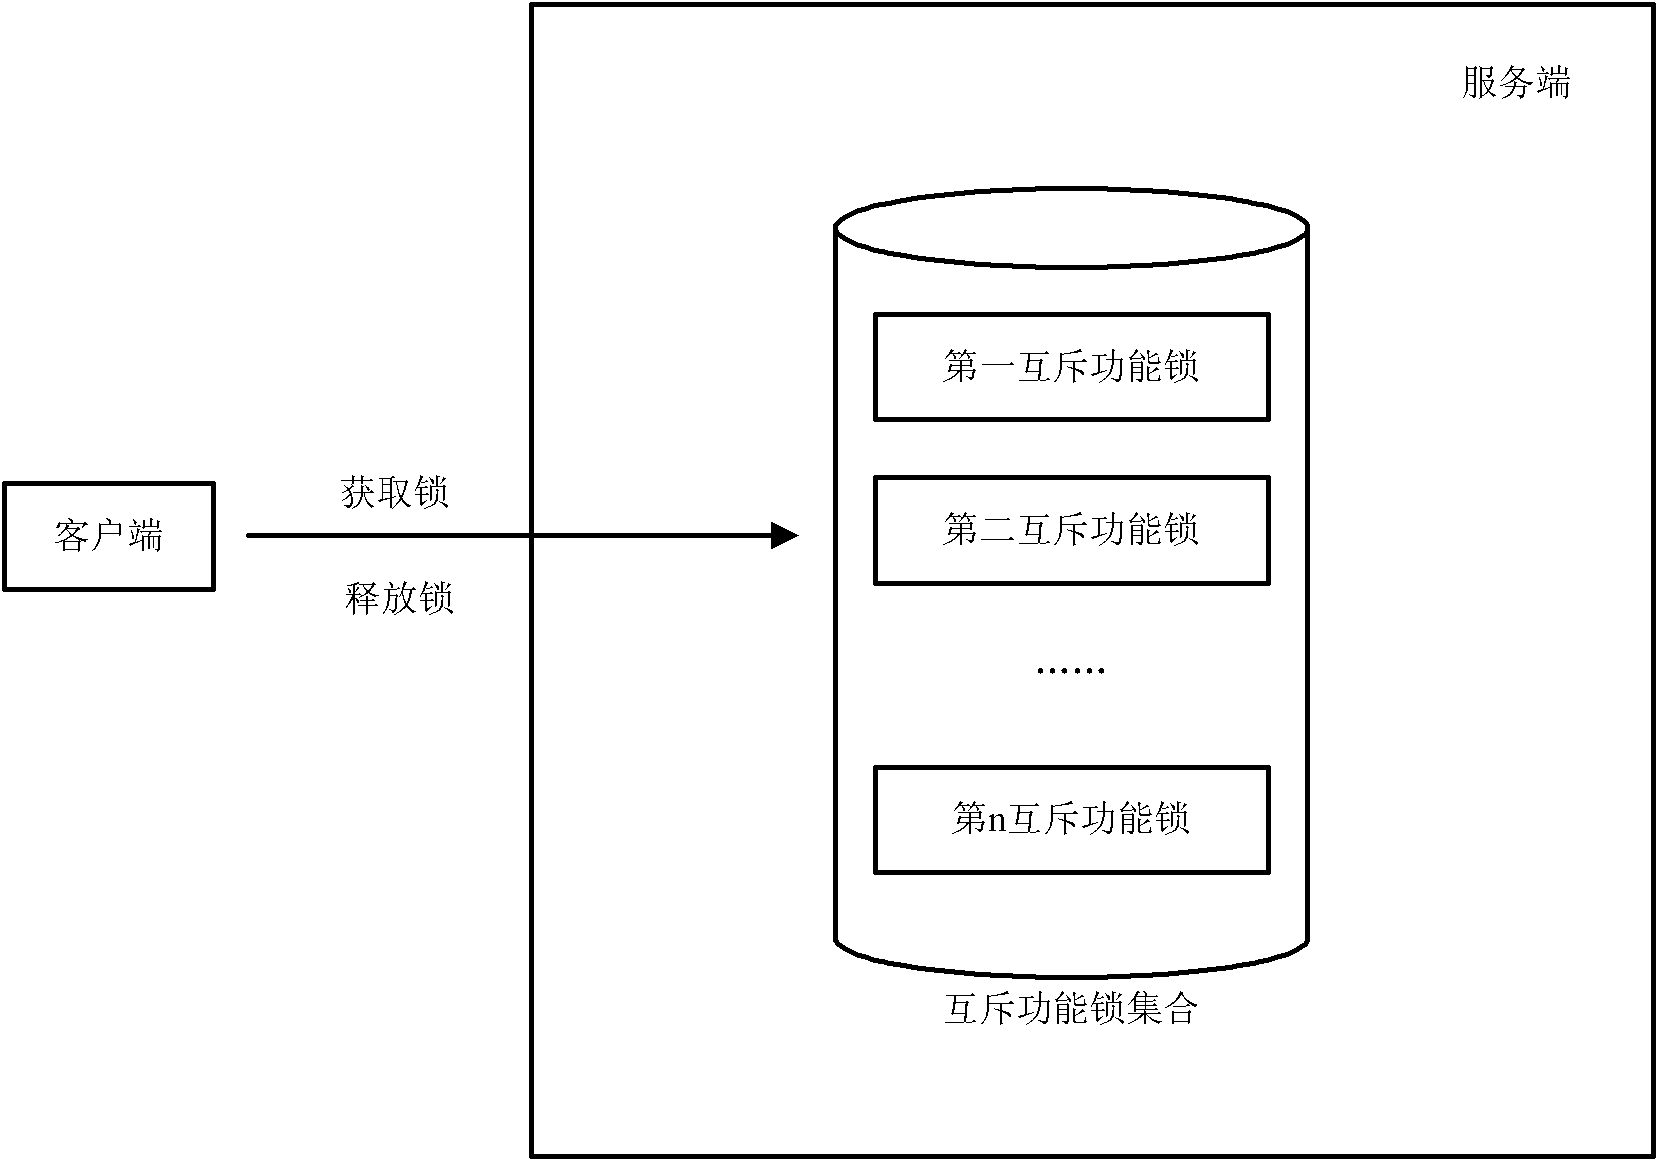 Scheduling method under client-side/server-side architecture and server